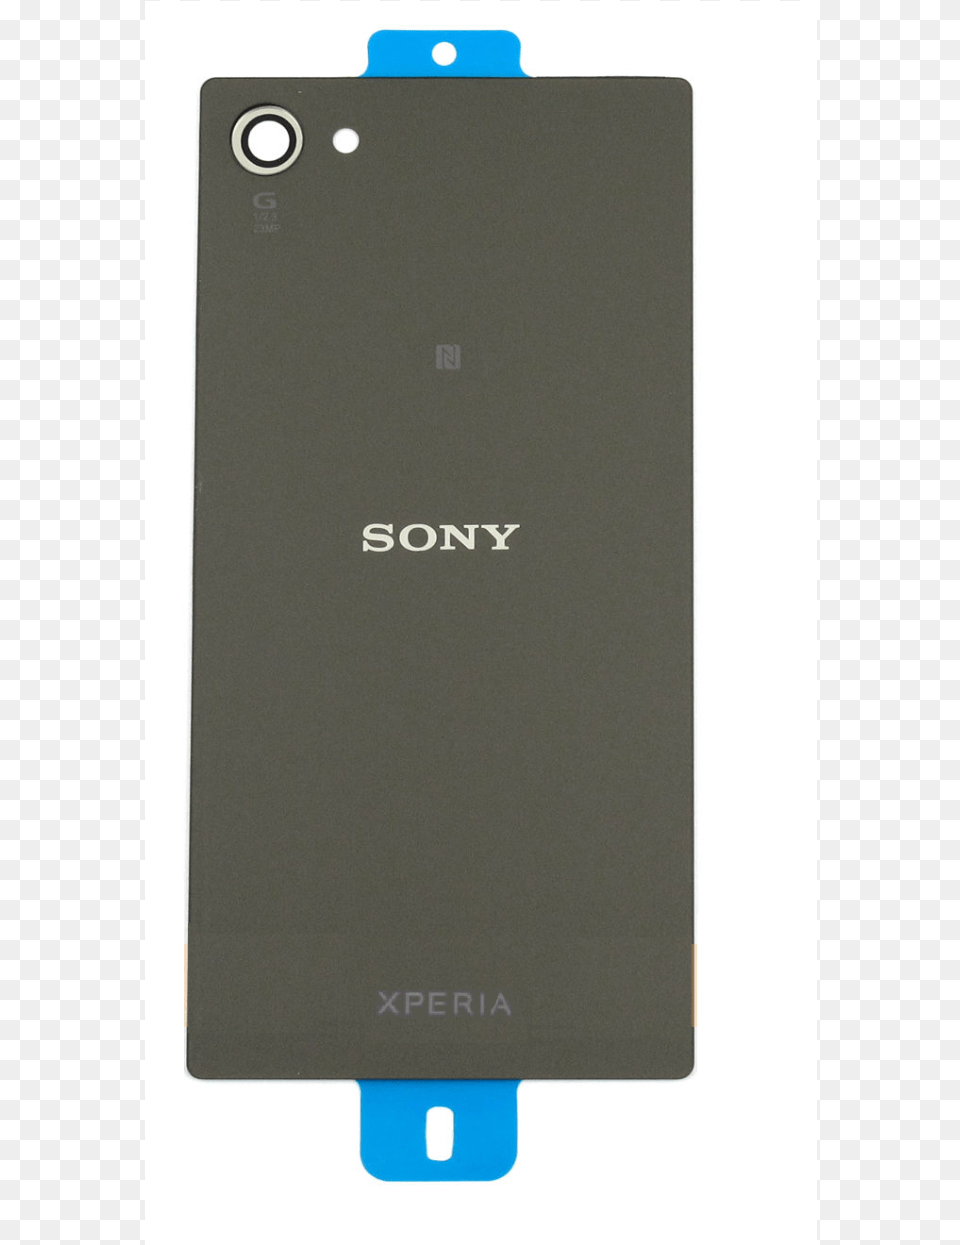 Sony Xperia Z5 Compact Battery Cover Rear Glass Panel Smartphone, Electronics, Mobile Phone, Phone, Computer Hardware Png